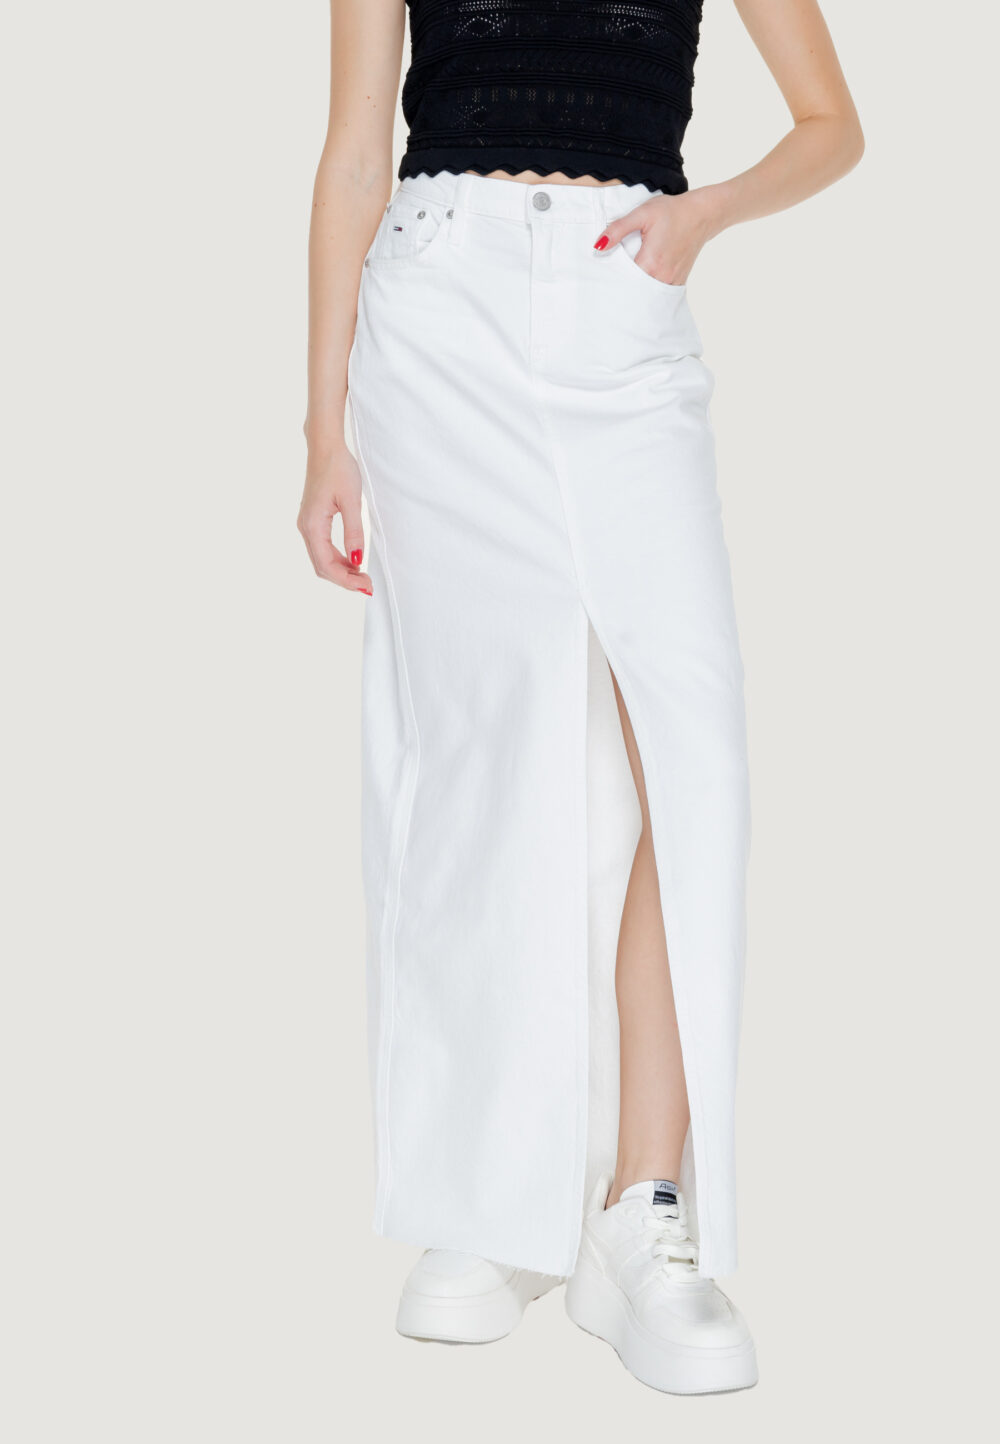 Gonna lunga Tommy Hilfiger Jeans CLAIRE HGH MAXI Bianco - Foto 1